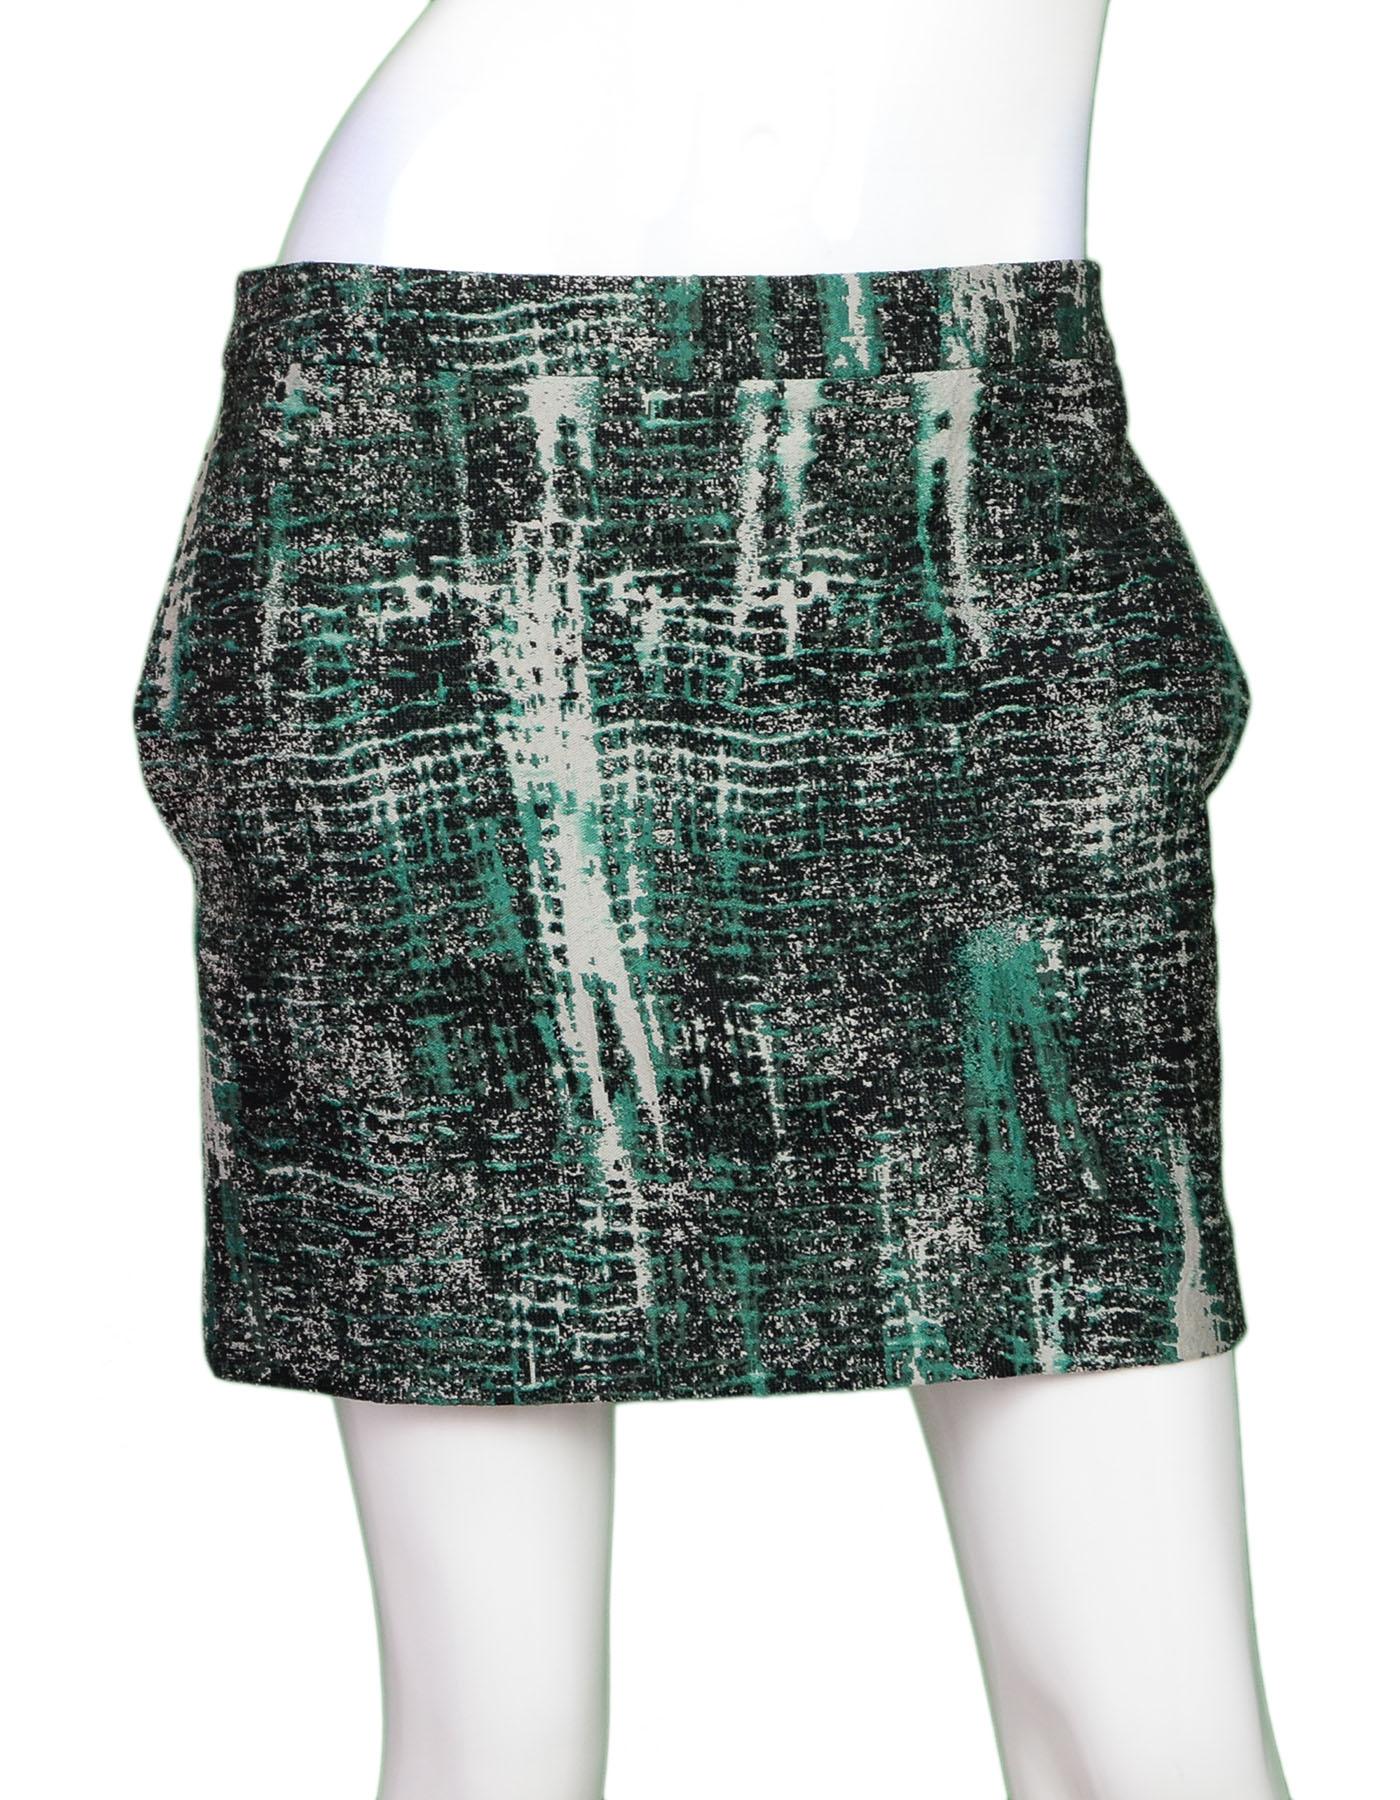 Stella McCartney Green & Black Mini Skirt Sz IT40 NWT

Made In: Hungary
Color: Green, black, cream
Composition: 54% polyester, 46% rayon
Lining: None
Closure/Opening: Back zip closure
Overall Condition: Excellent pre-owned condition, NWT

Marked